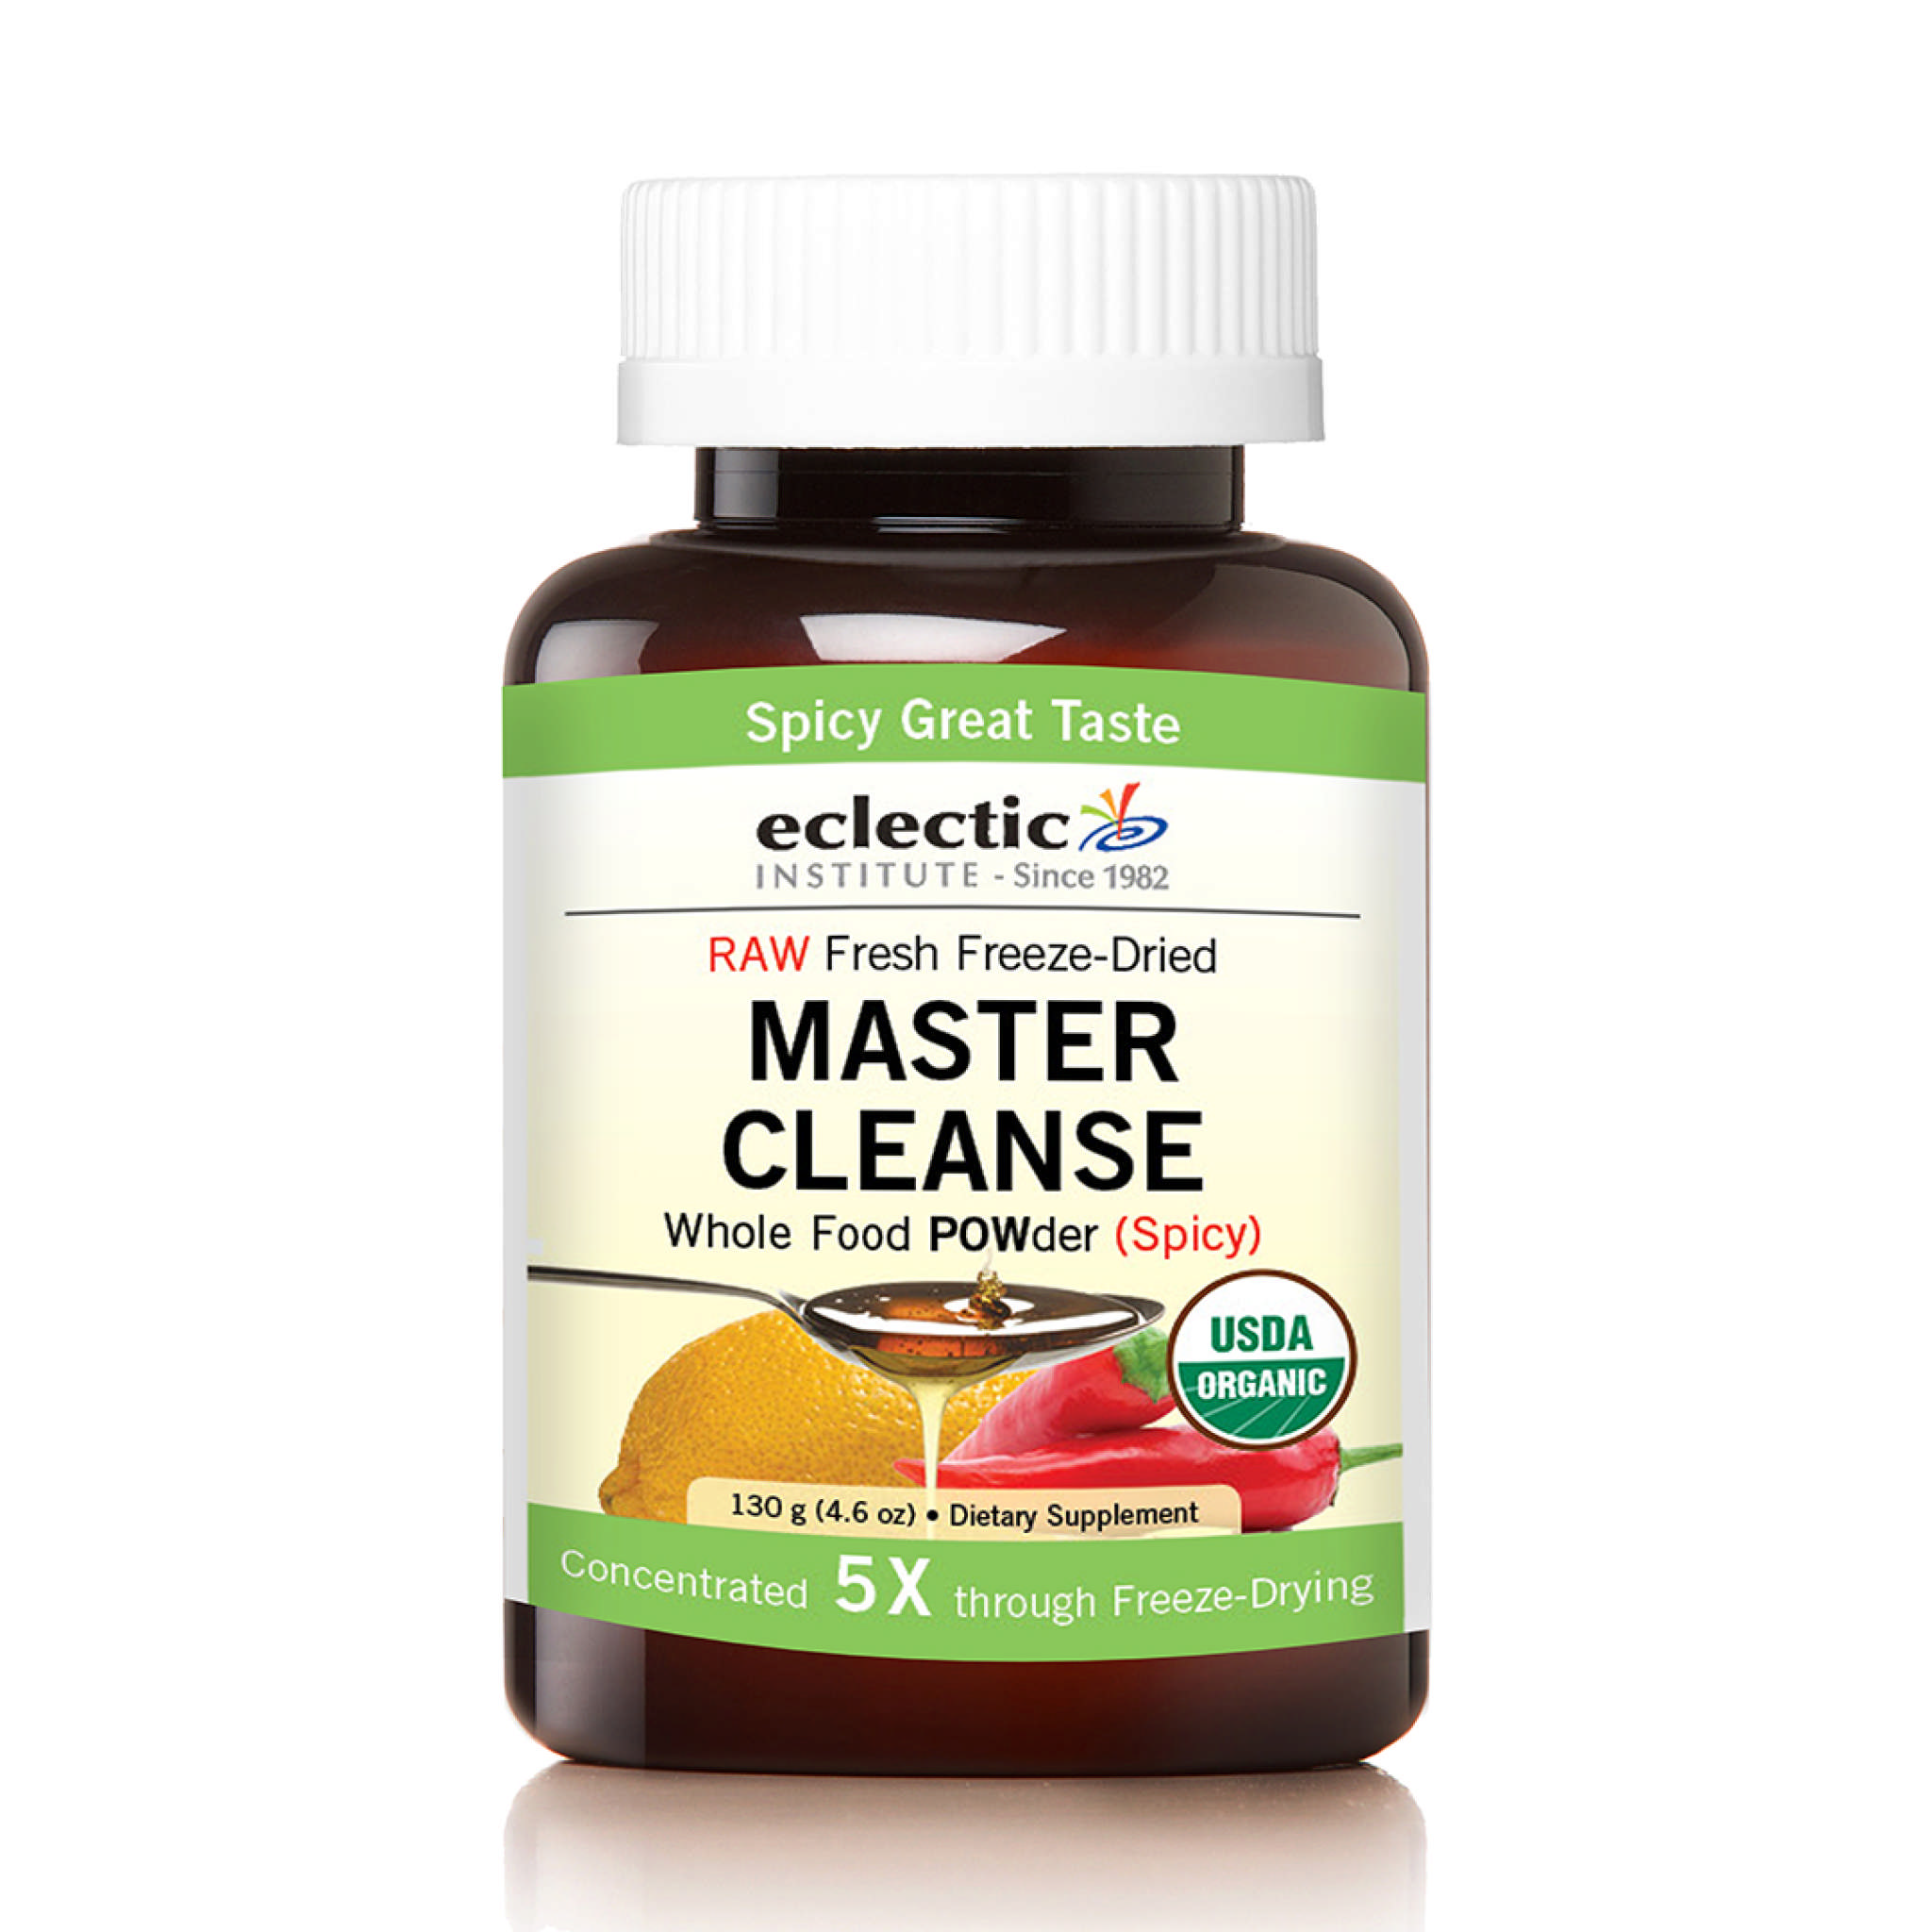 Eclectic Institute - Master Cleanse powder Spicy